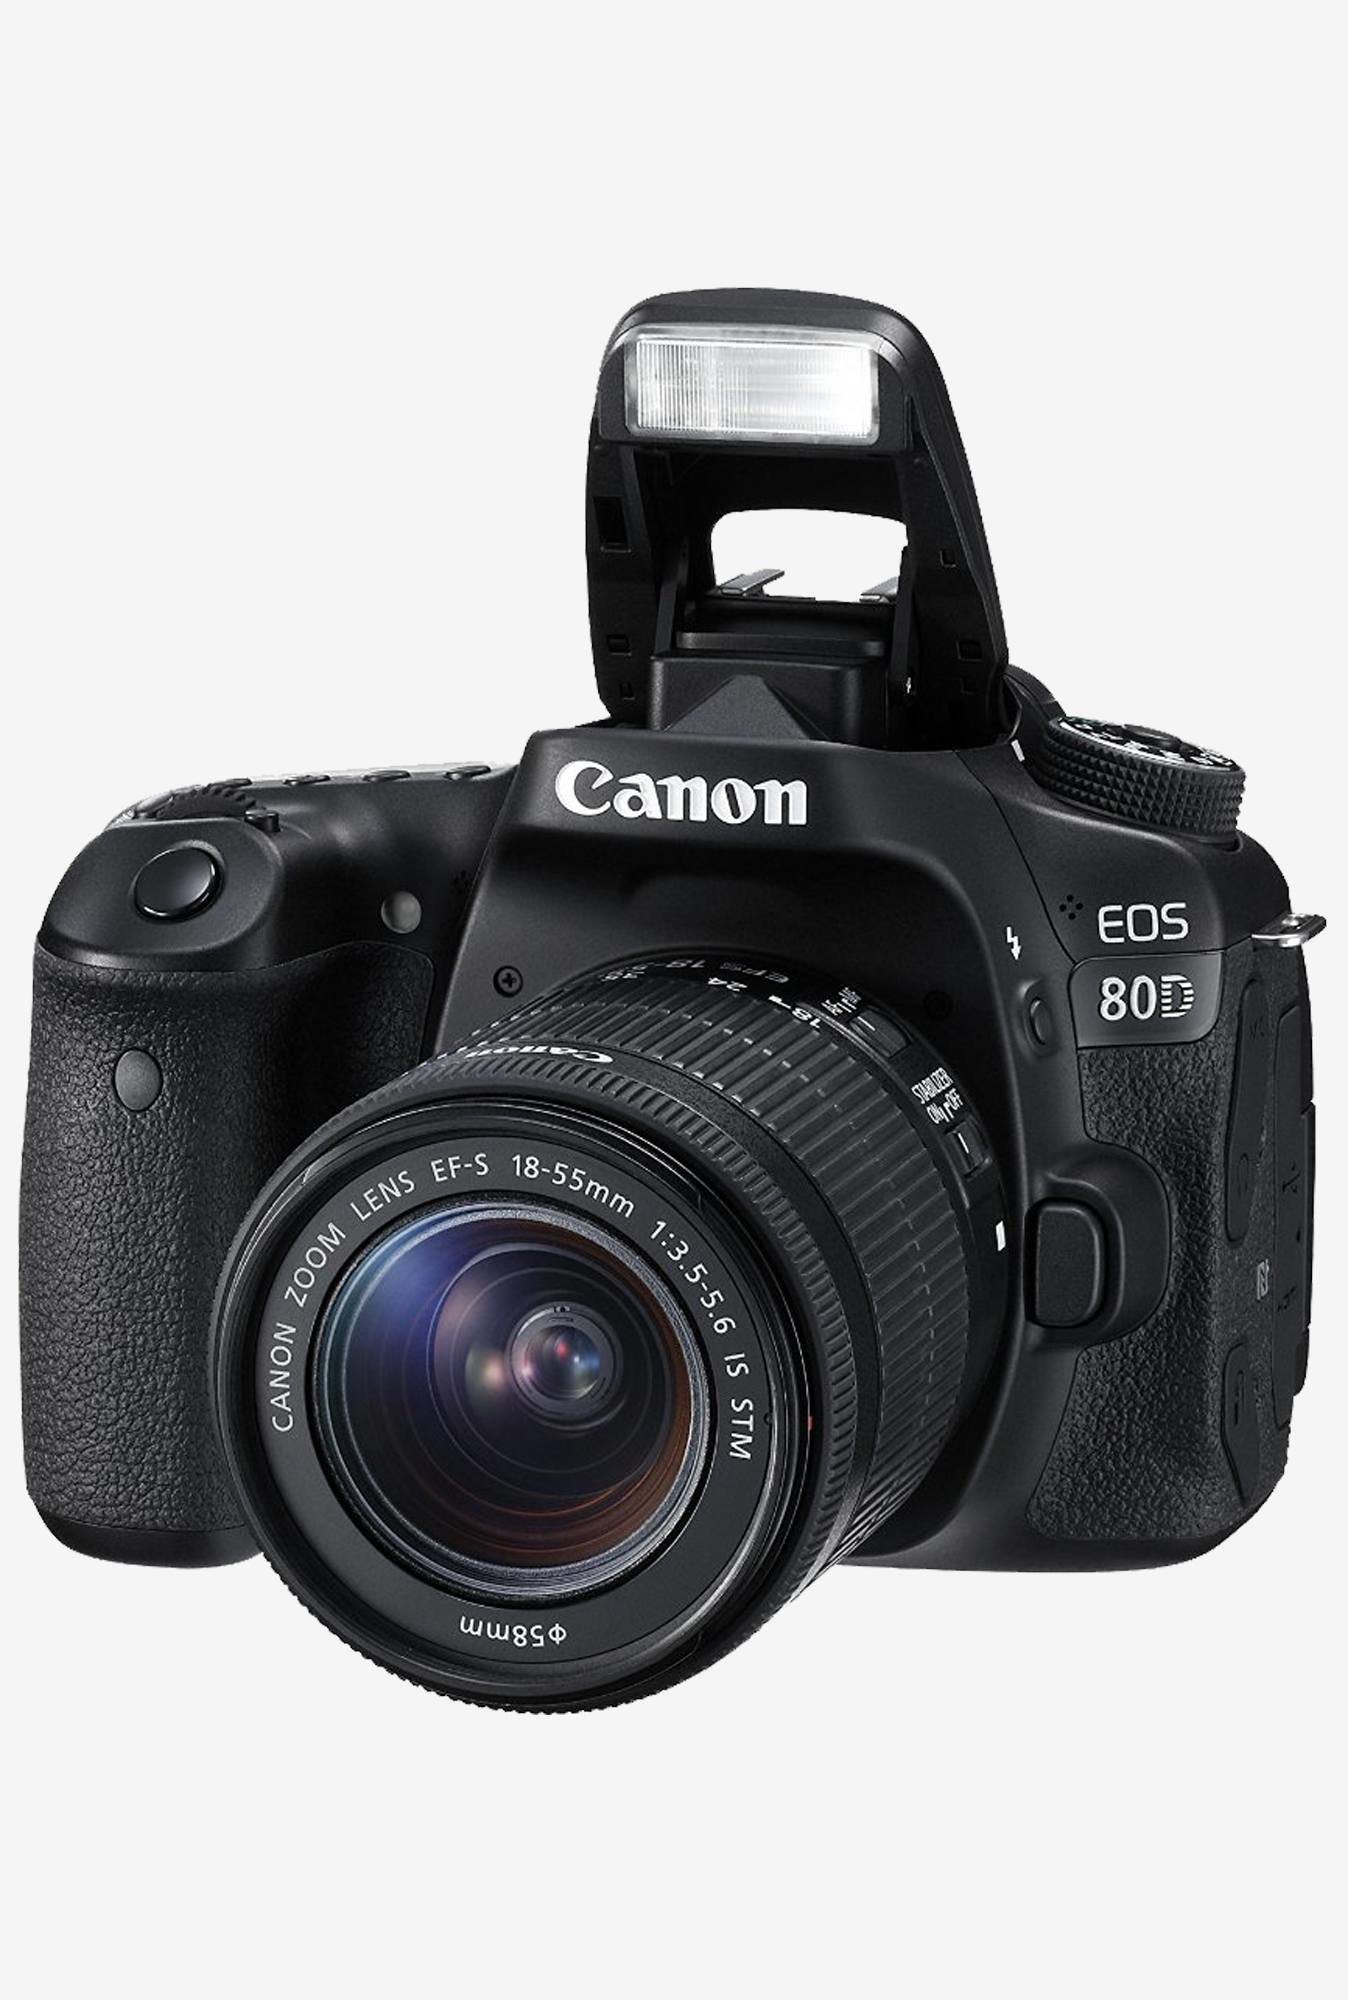 Tatacliq- Canon EOS 80D DSLR Camera with EF-S18-55 IS STM Lens Black @ Rs. 73710